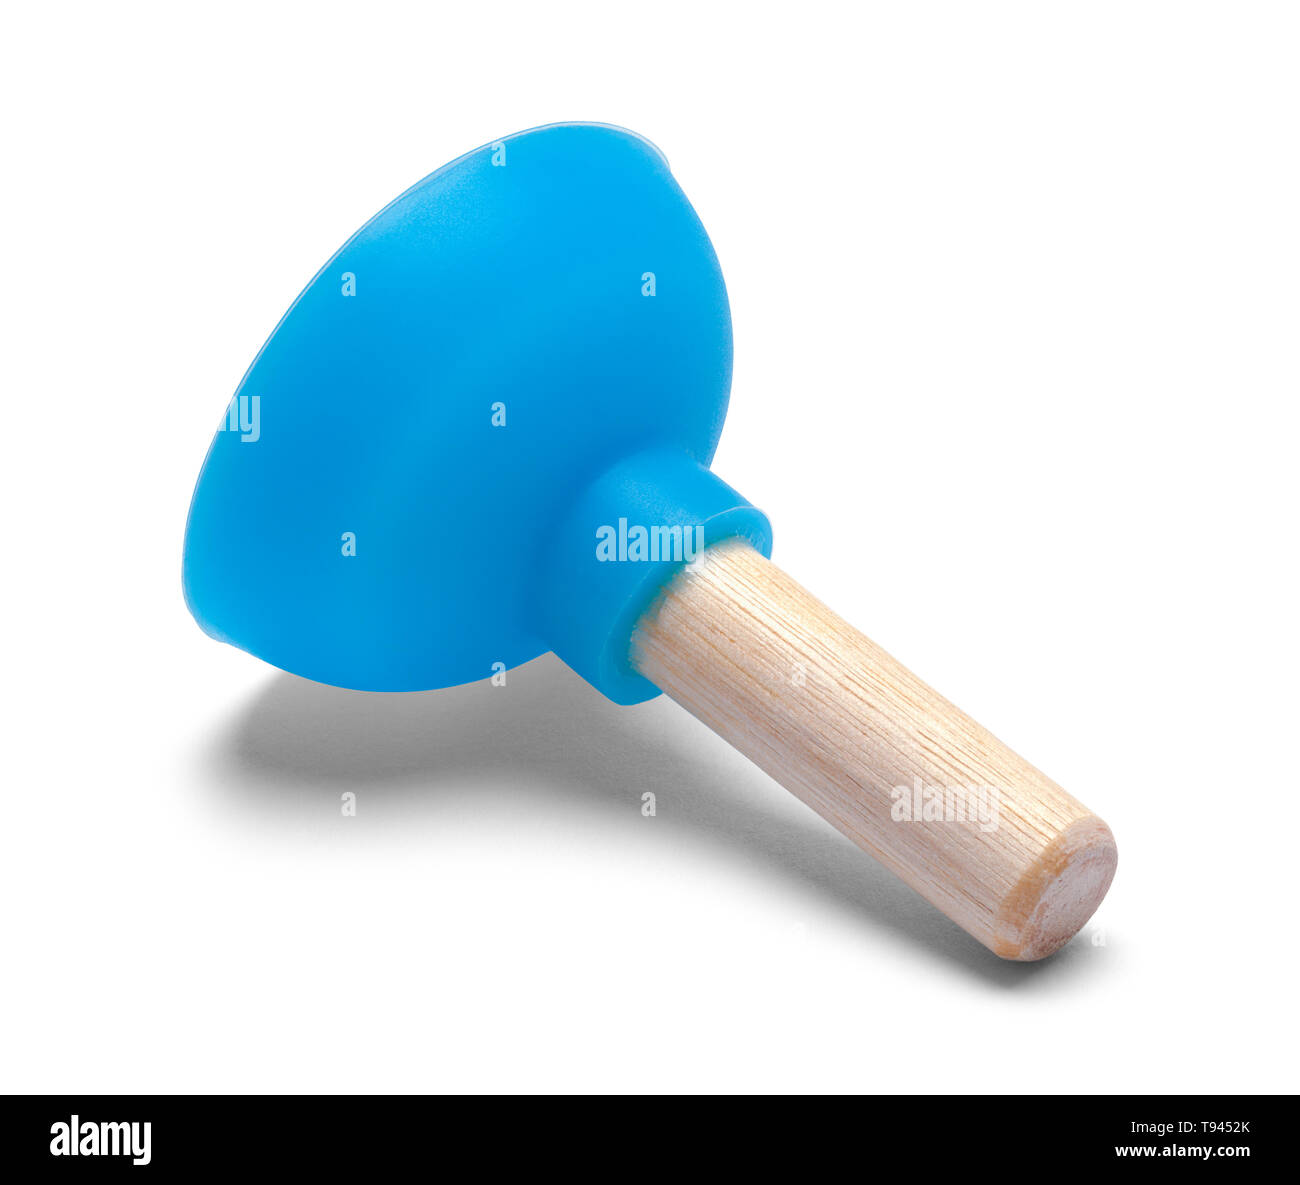 Small Blue Toilet Plunger Isolated on White. Stock Photo